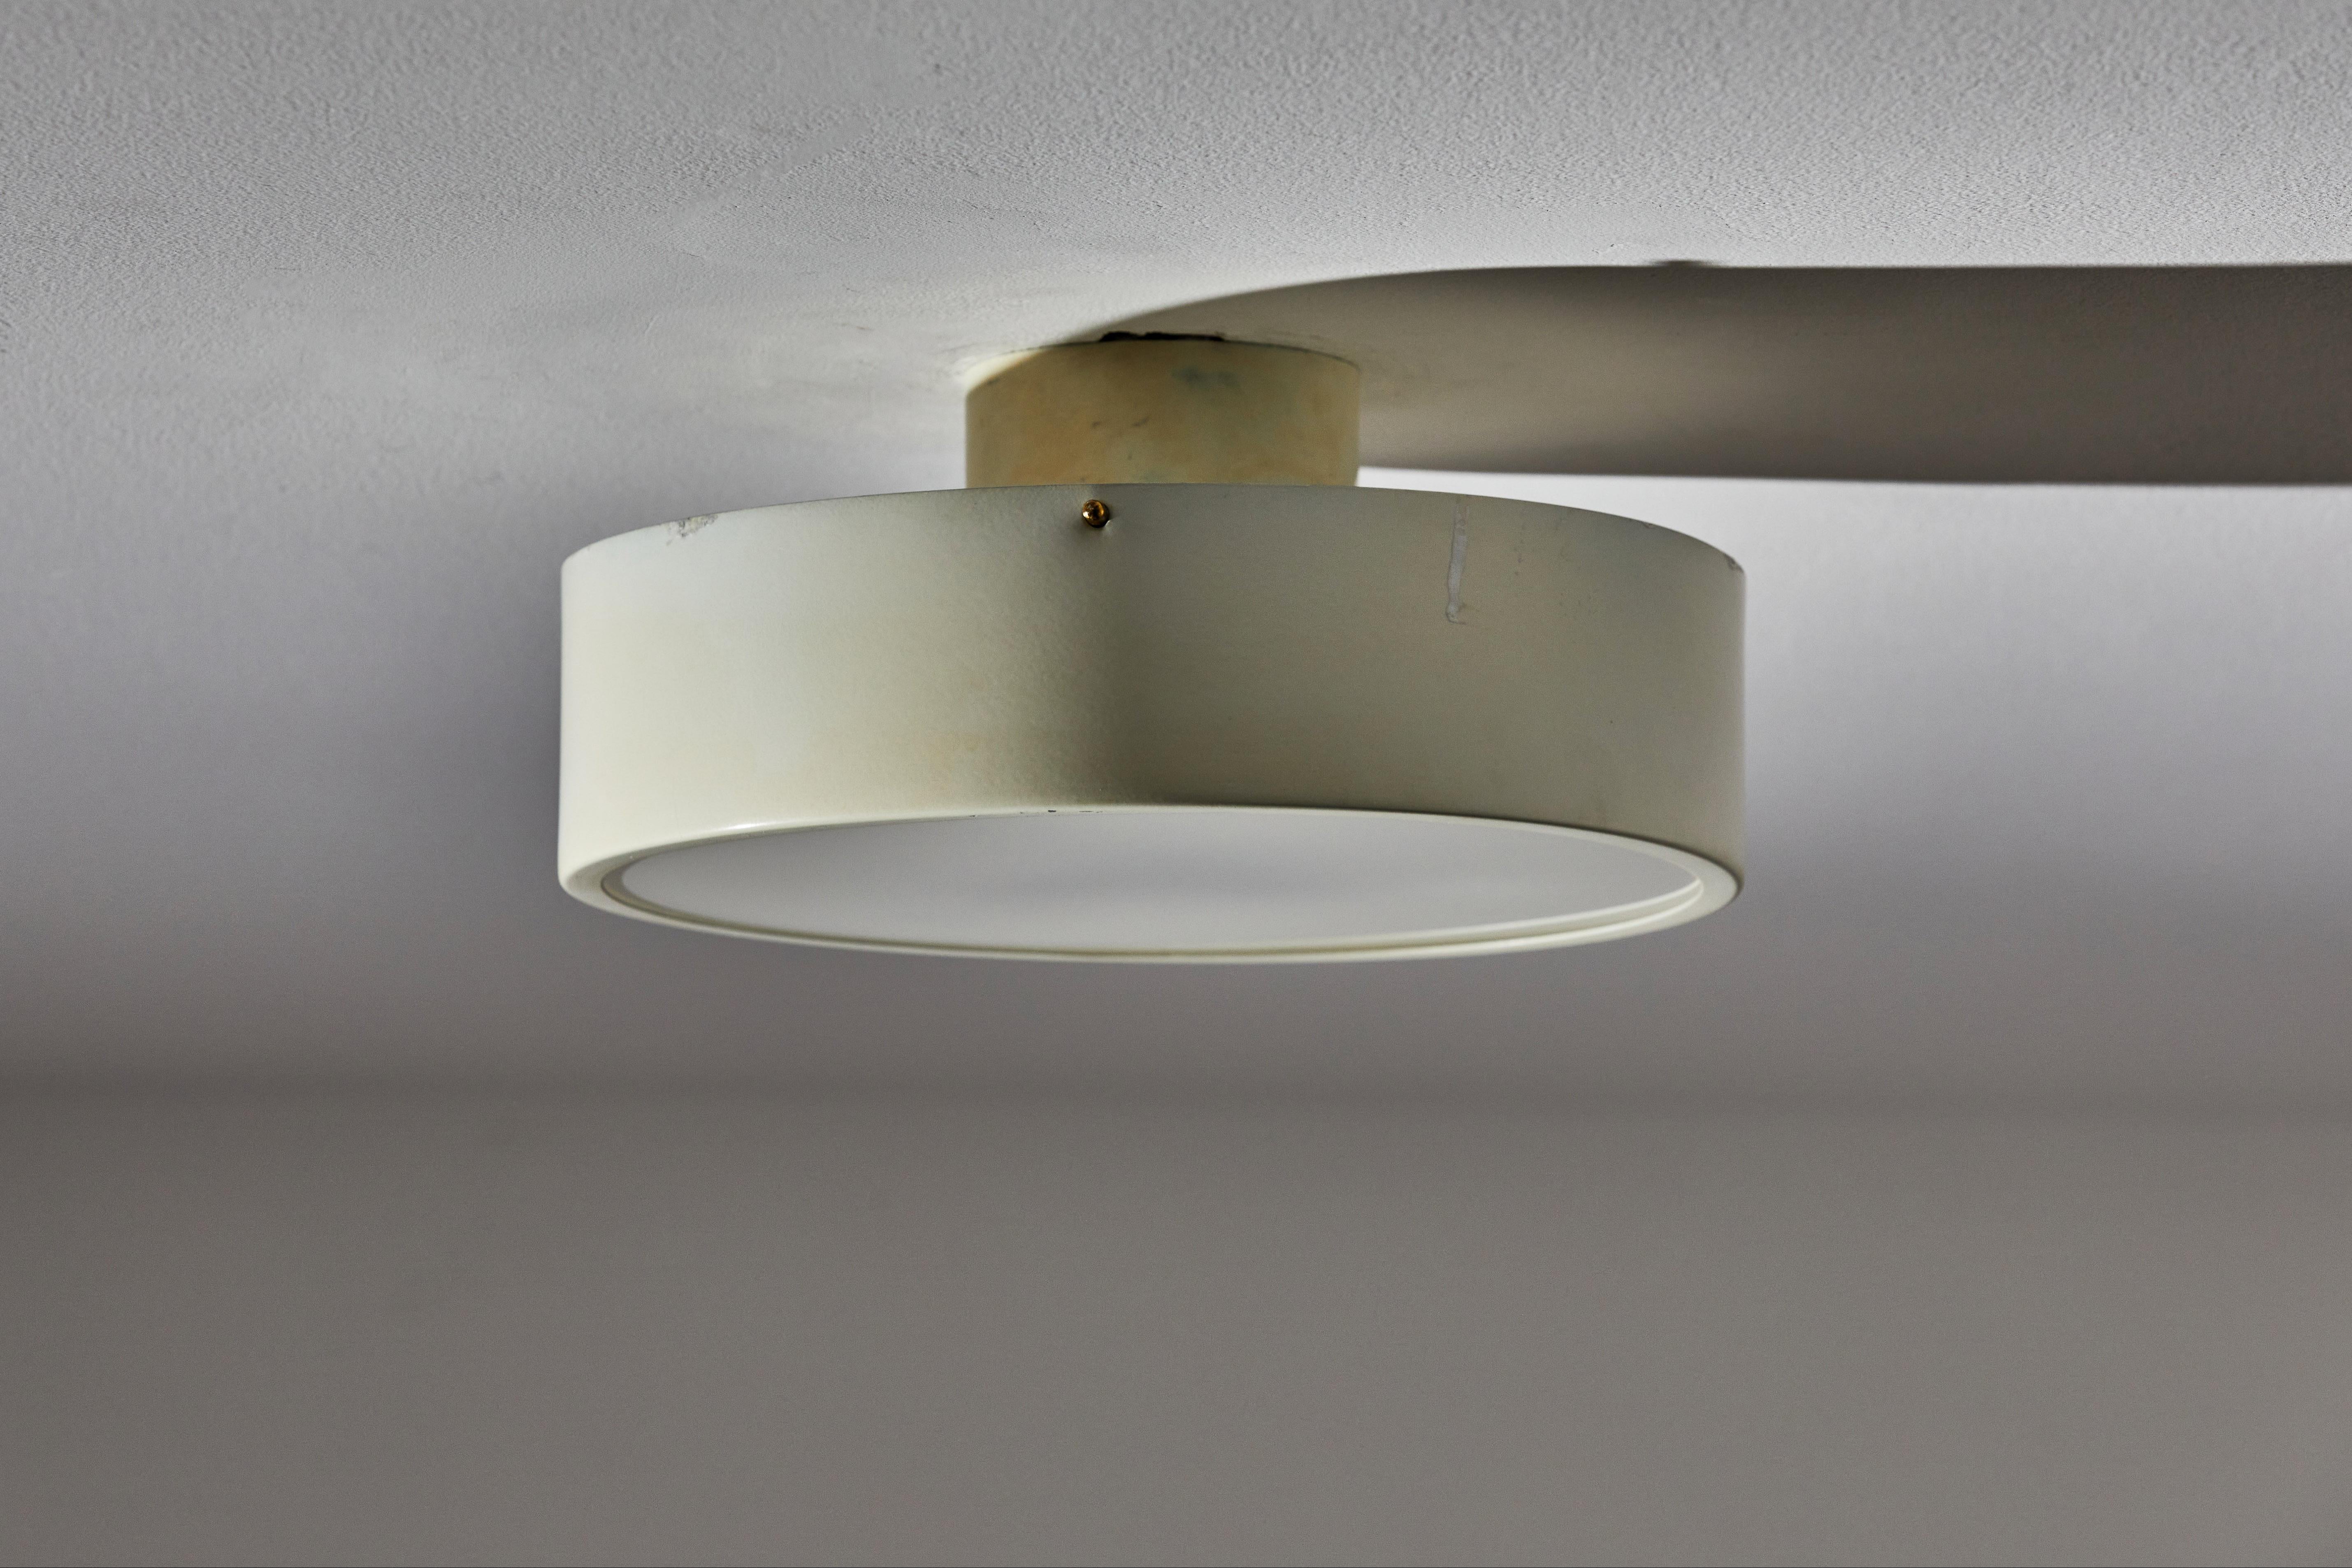 Mid-20th Century One Model 450 Flushmount Ceiling Light by Tito Agnoli for Oluce